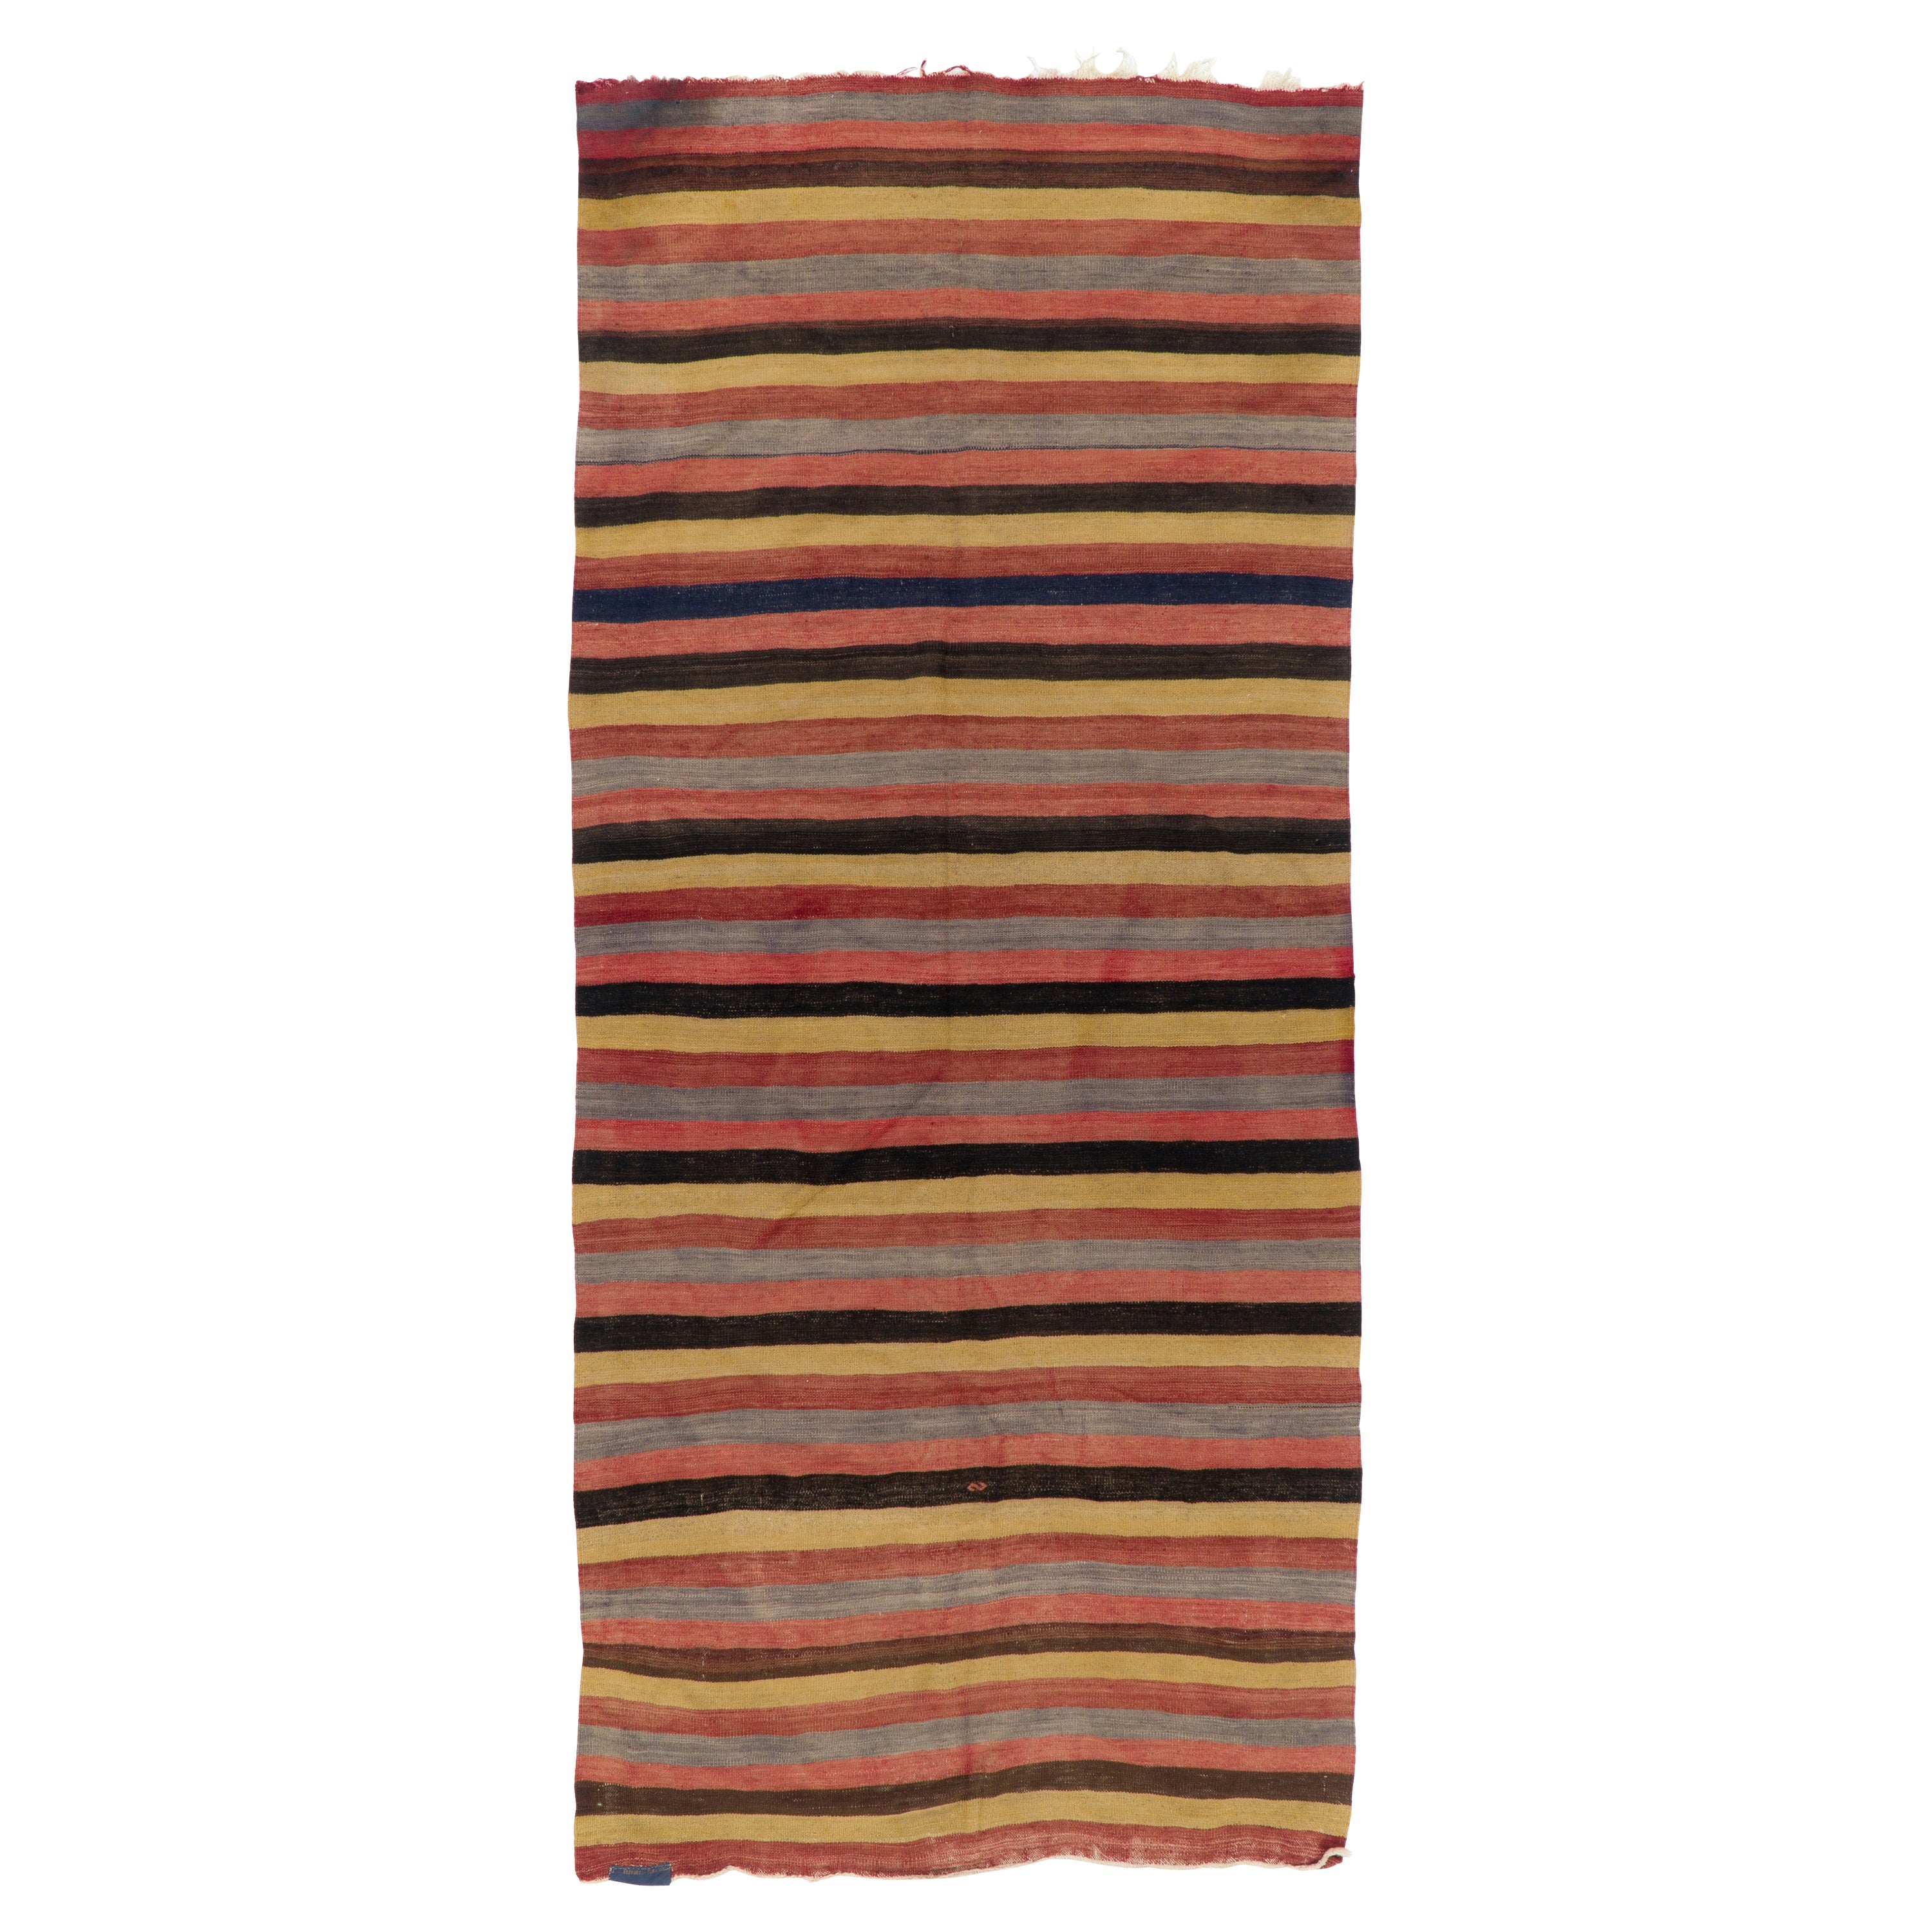 5x11 Ft Hand-Woven Vintage Banded Turkish Kilim, All Wool, Flat-Weave Runner Rug For Sale